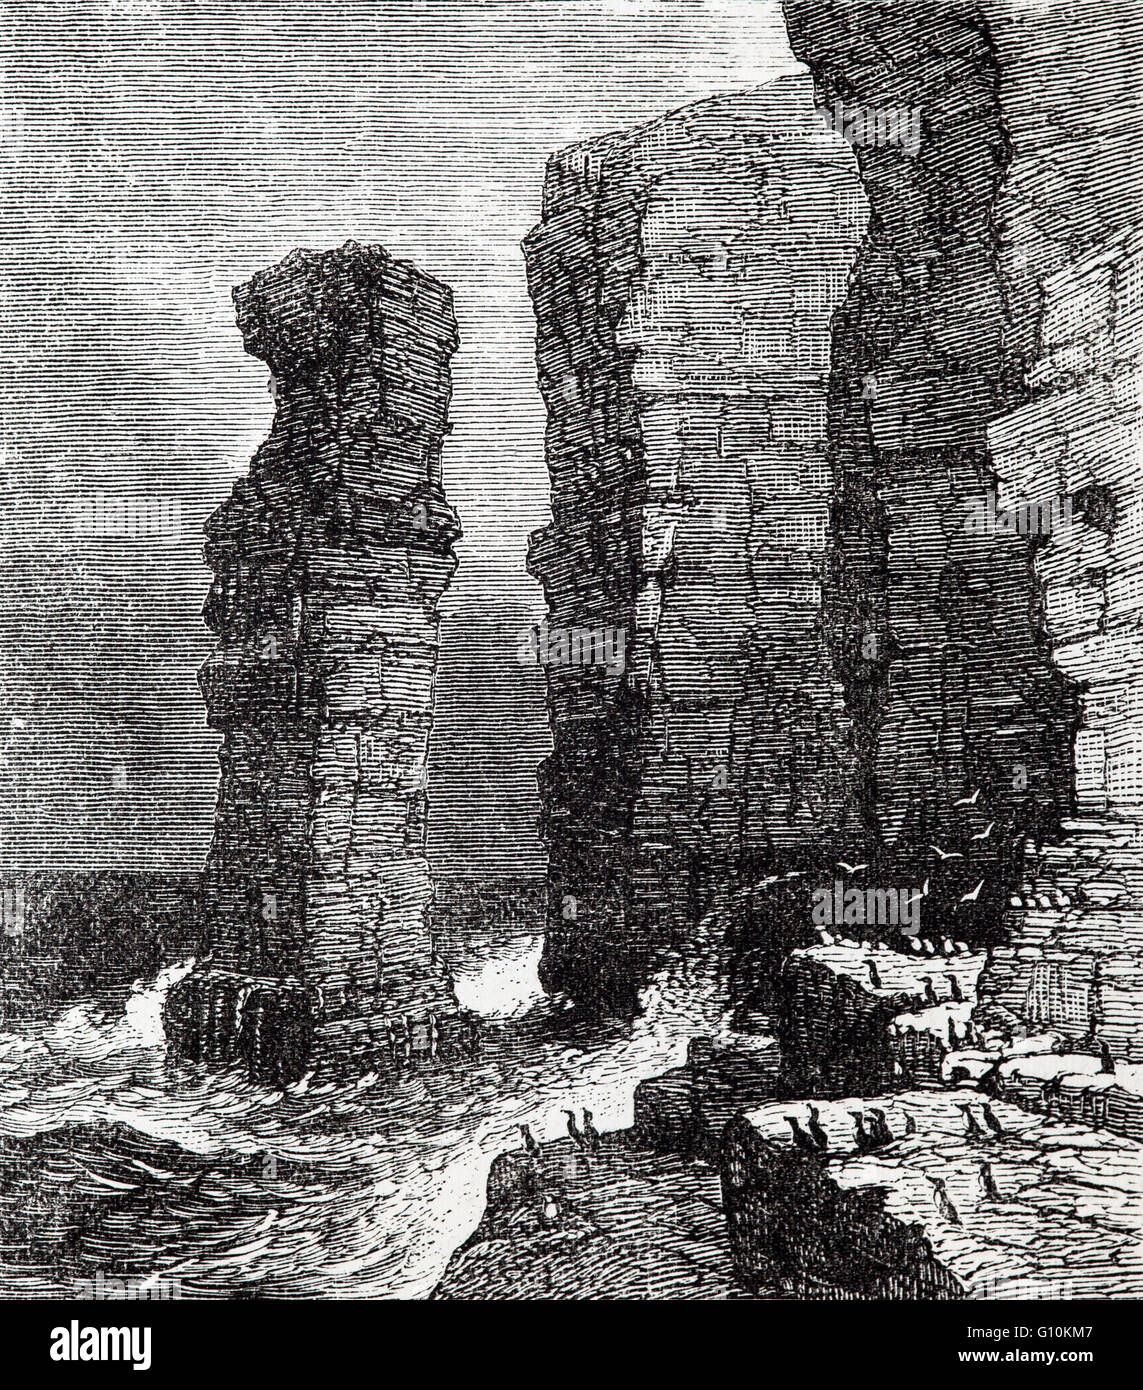 The Duncansby Stacks, prominent sea stacks at Duncansby Head, now a  Site of Special Scientific Interest, The headland juts into the North Sea, with the Pentland Firth to its north and west and the Moray Firth to its south, Scotland Stock Photo